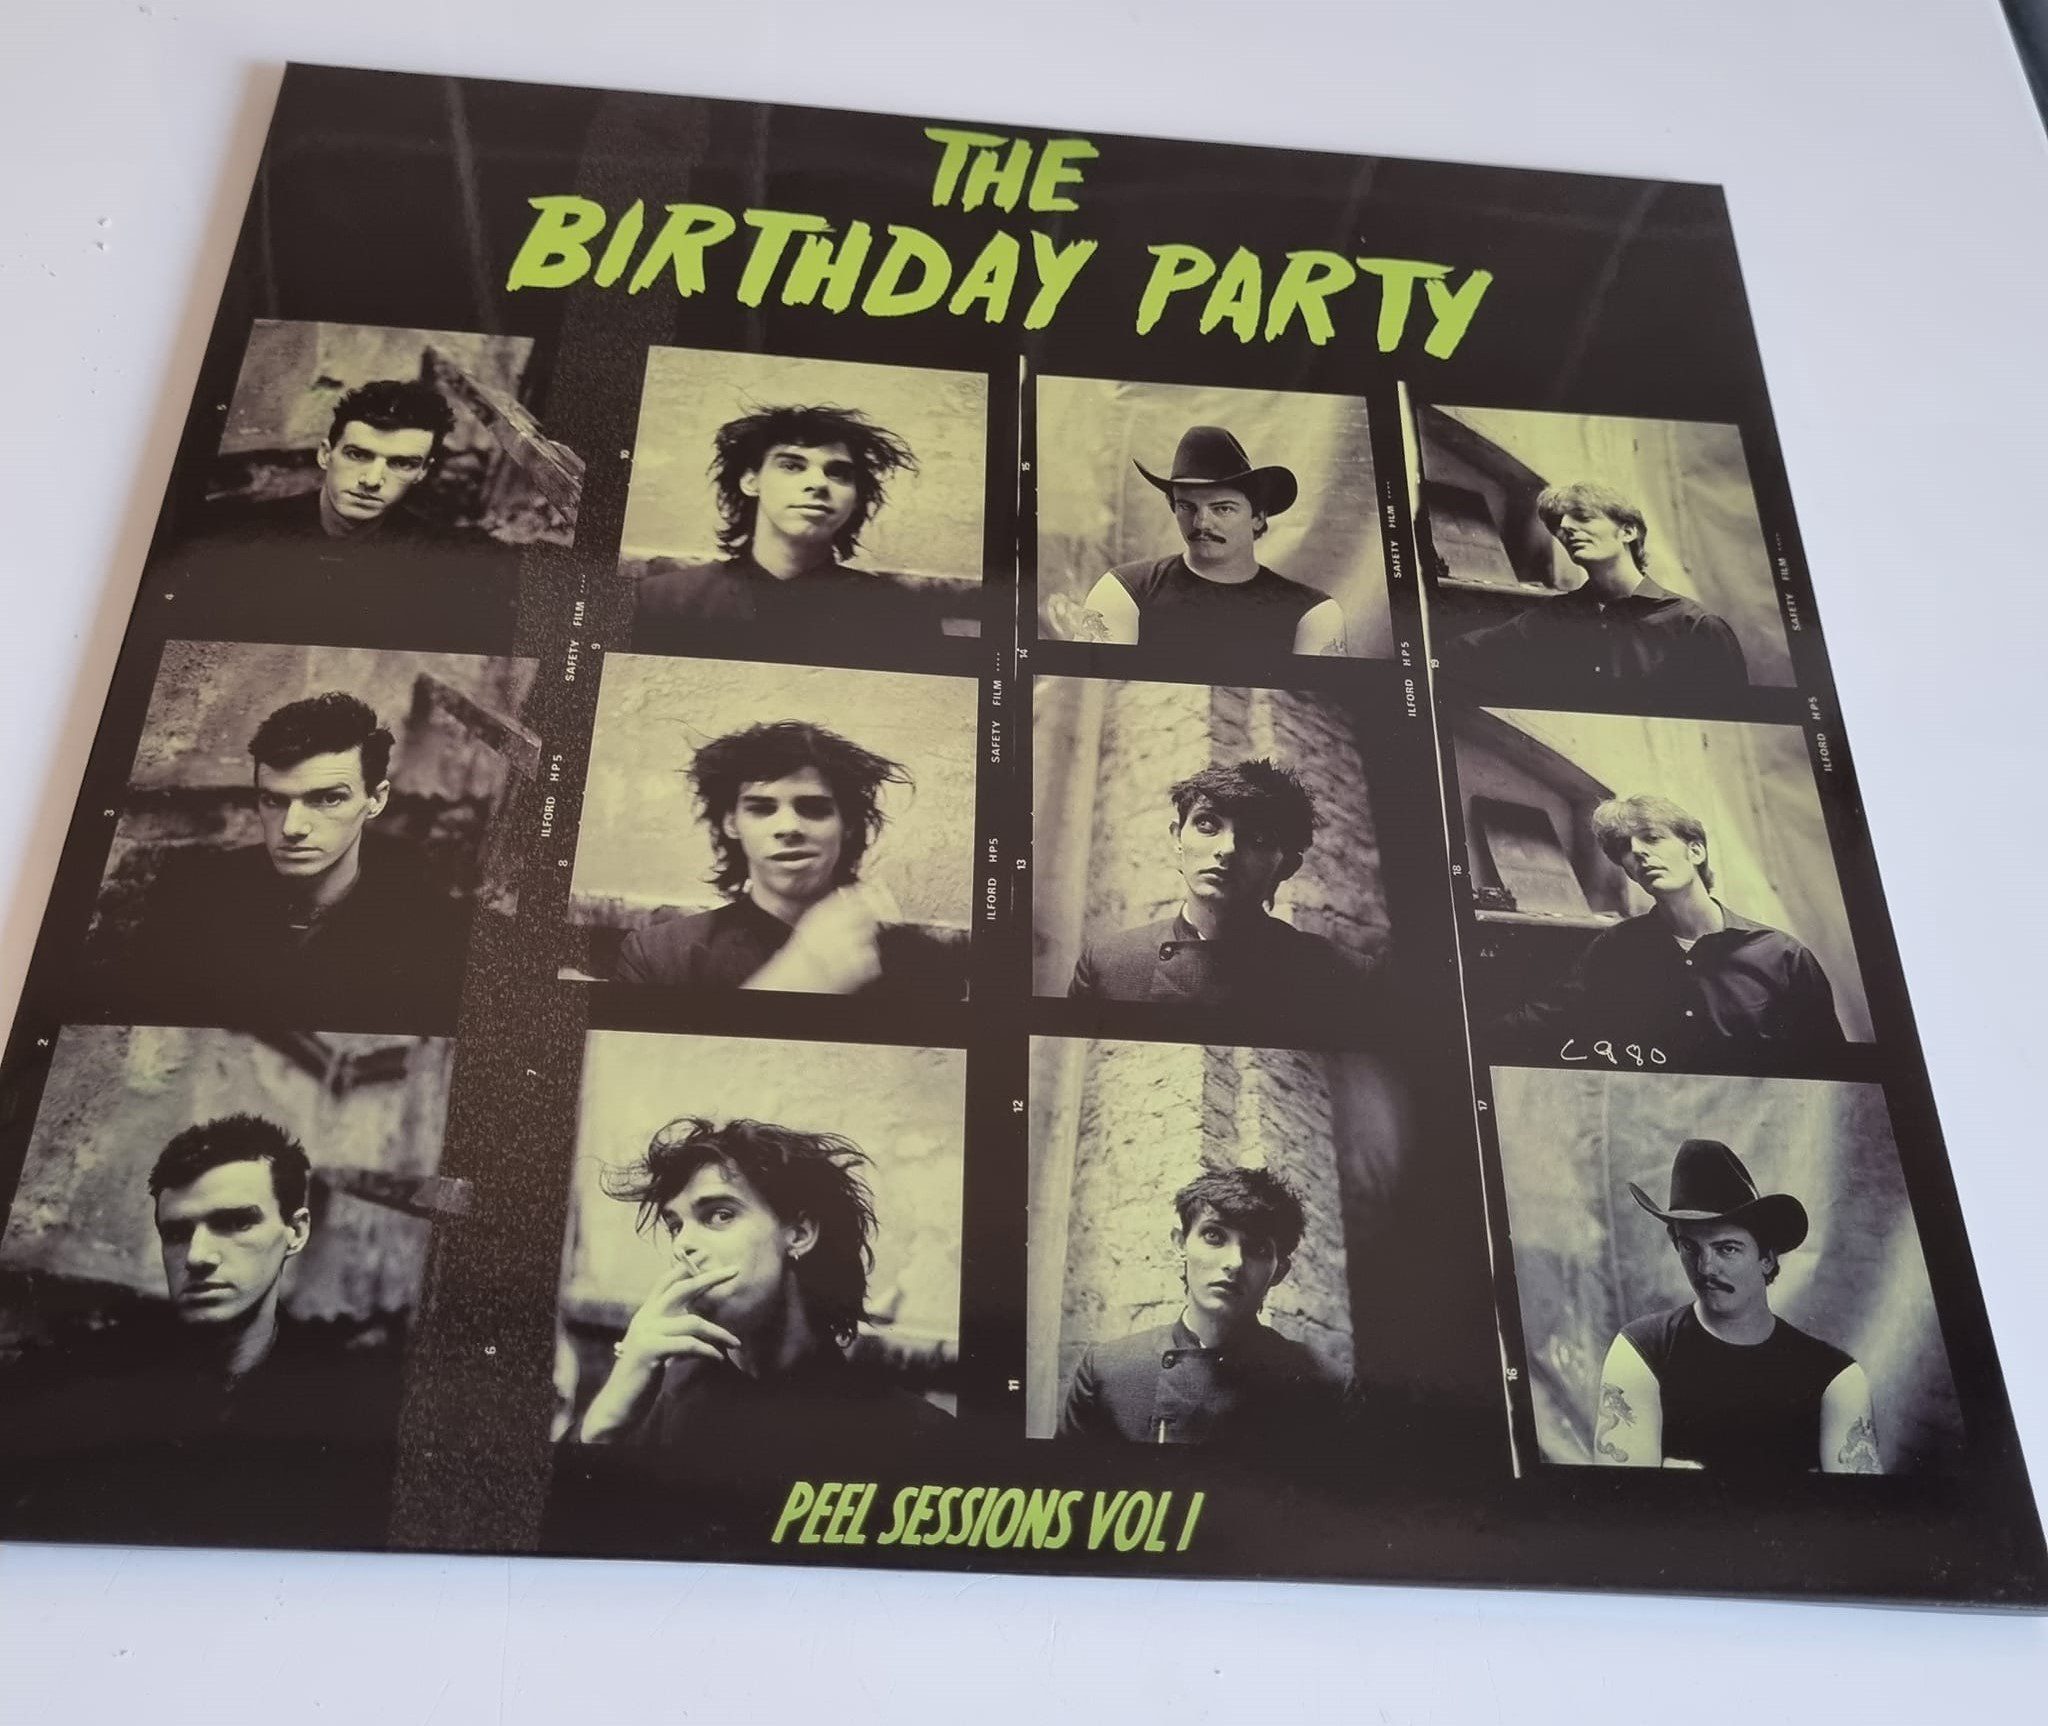 Buy this rare Birthday Party record by clicking here